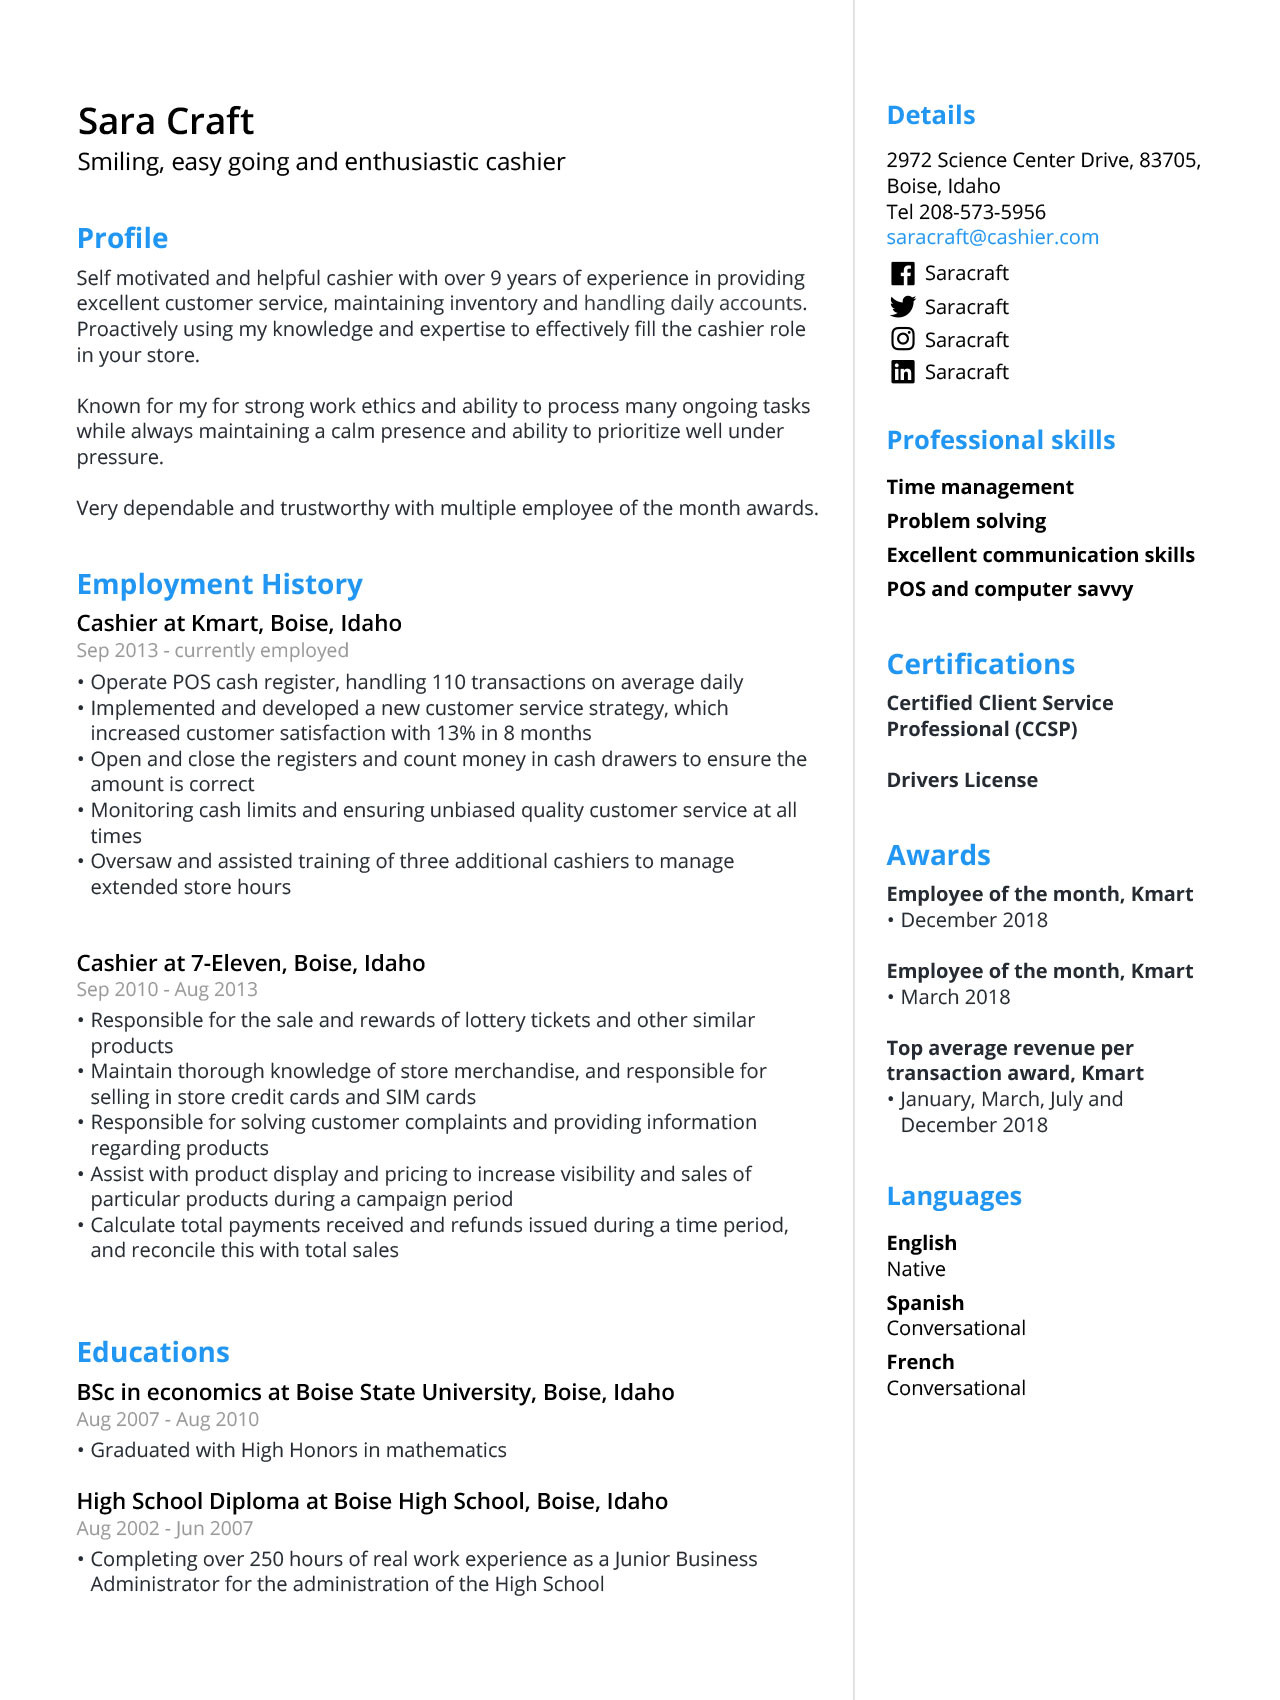 Sample Honors and Awards On Resume Cashier Resume Sample & Template [2022 Guide] – Jofibo